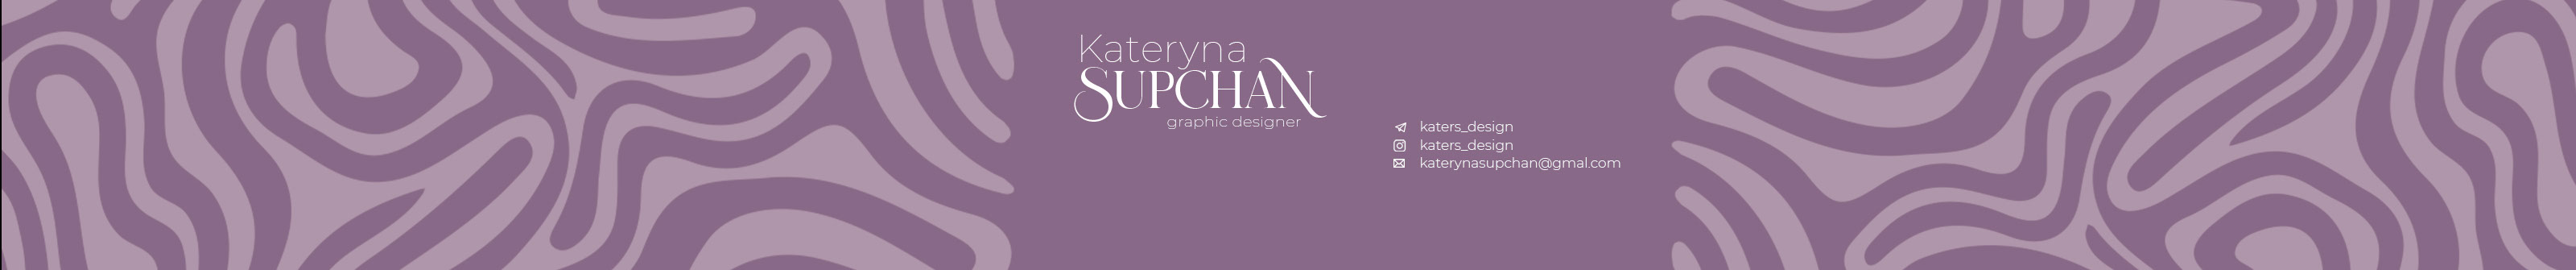 Kateryna Supchan's profile banner